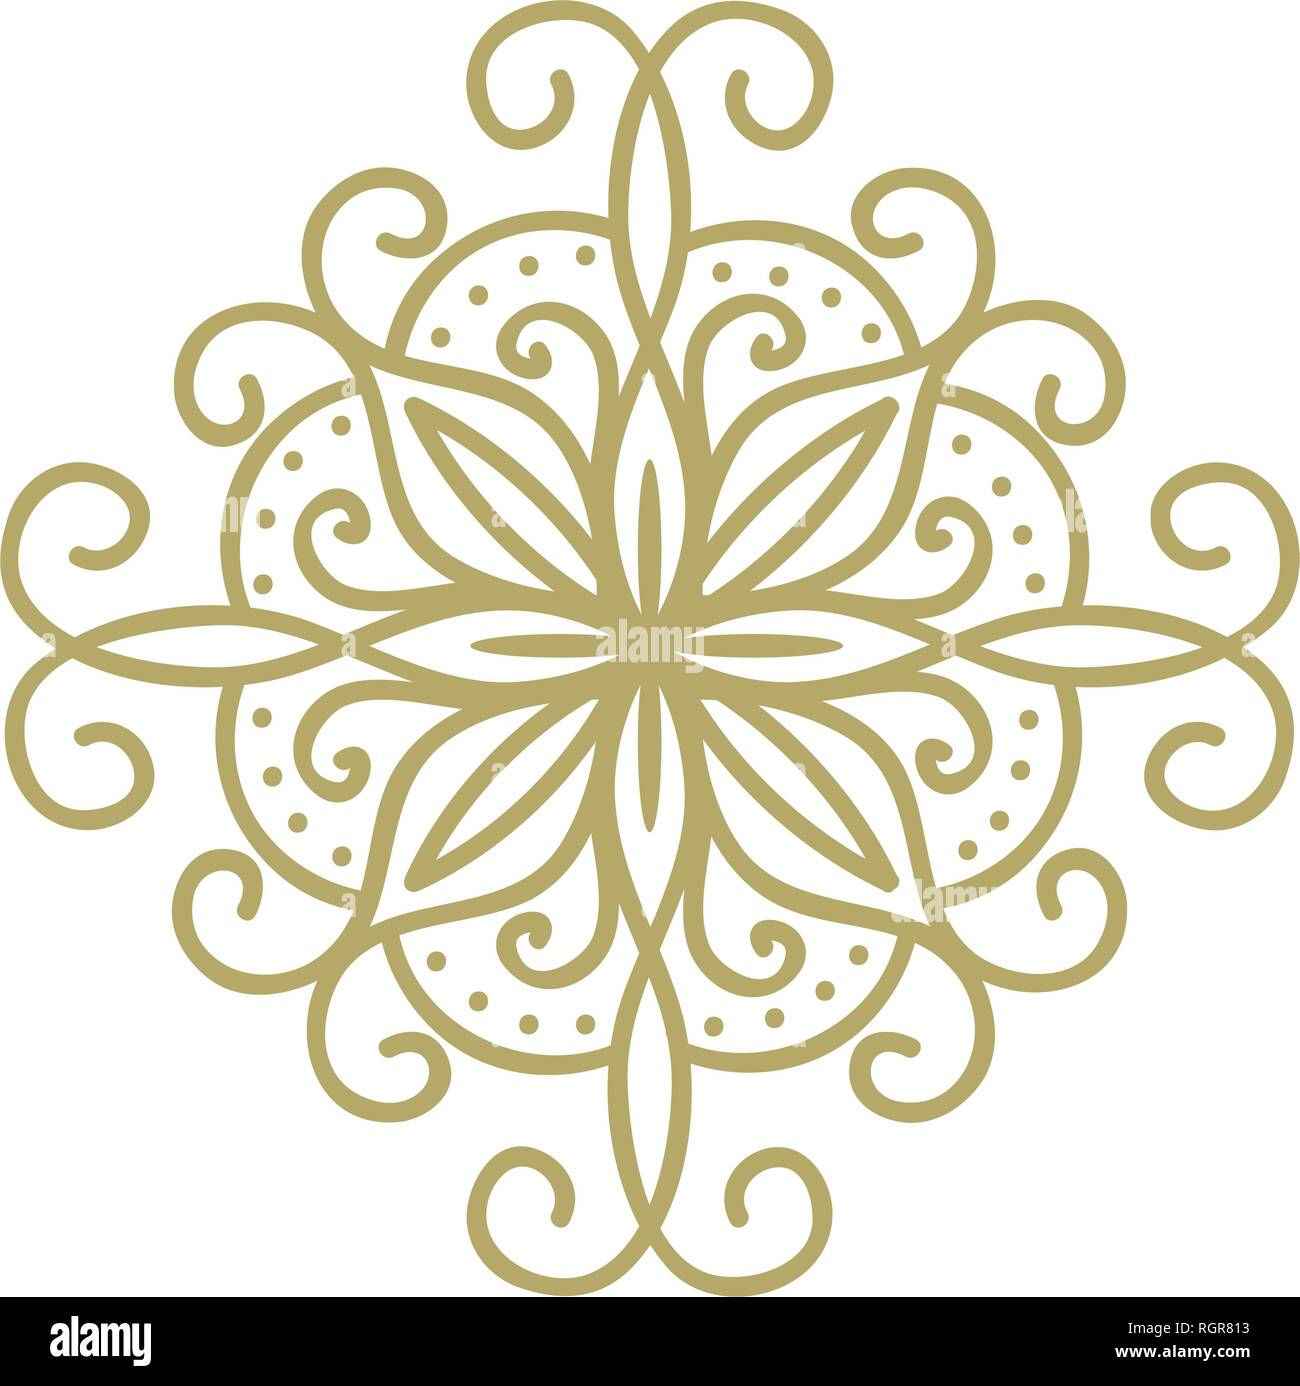 Abstract floral logo. Oriental pattern Stock Vector